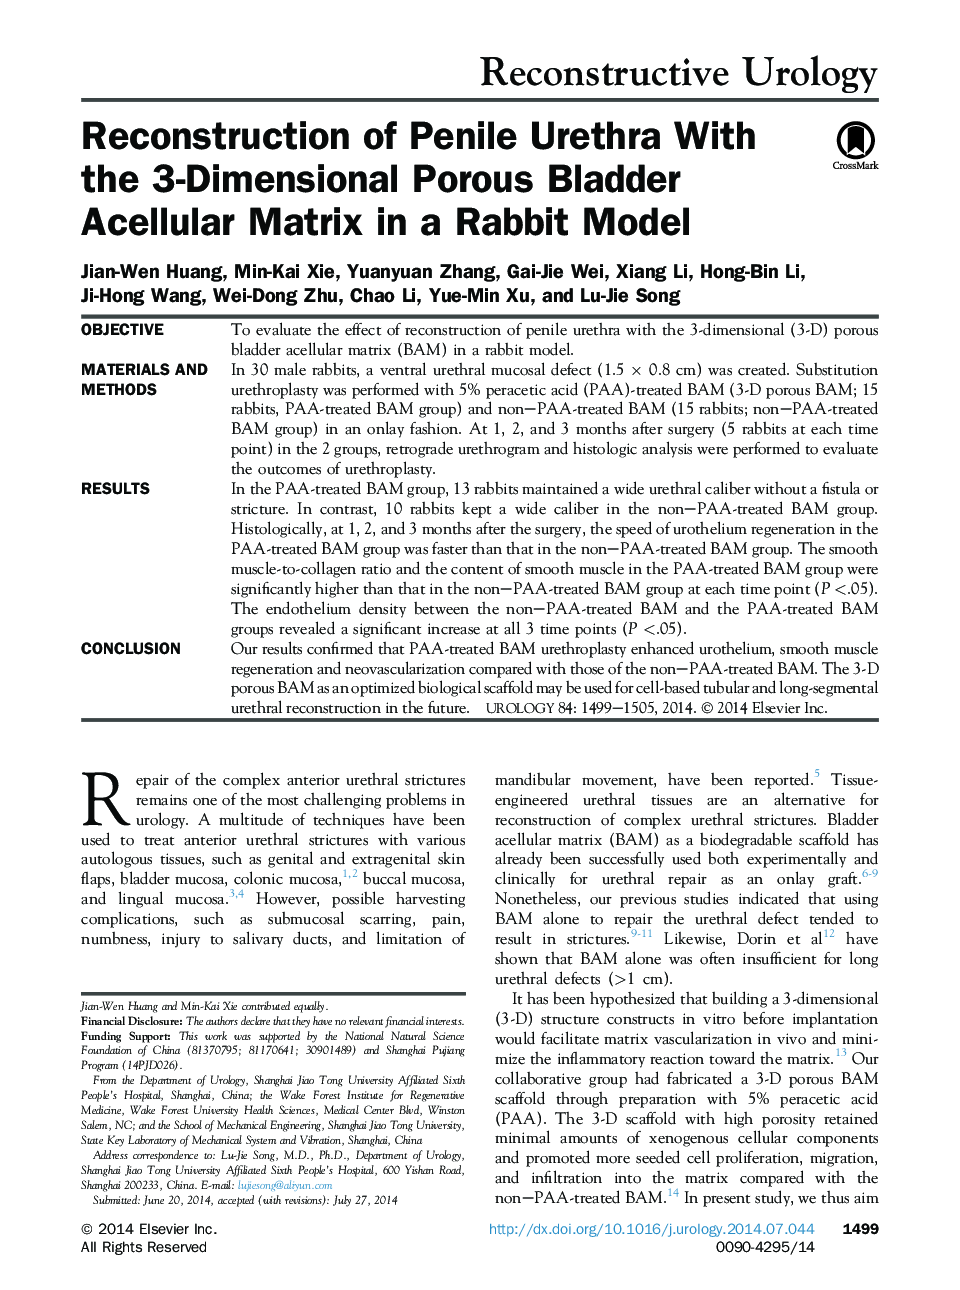 Reconstruction of Penile Urethra With the 3-Dimensional Porous Bladder Acellular Matrix in a Rabbit Model 